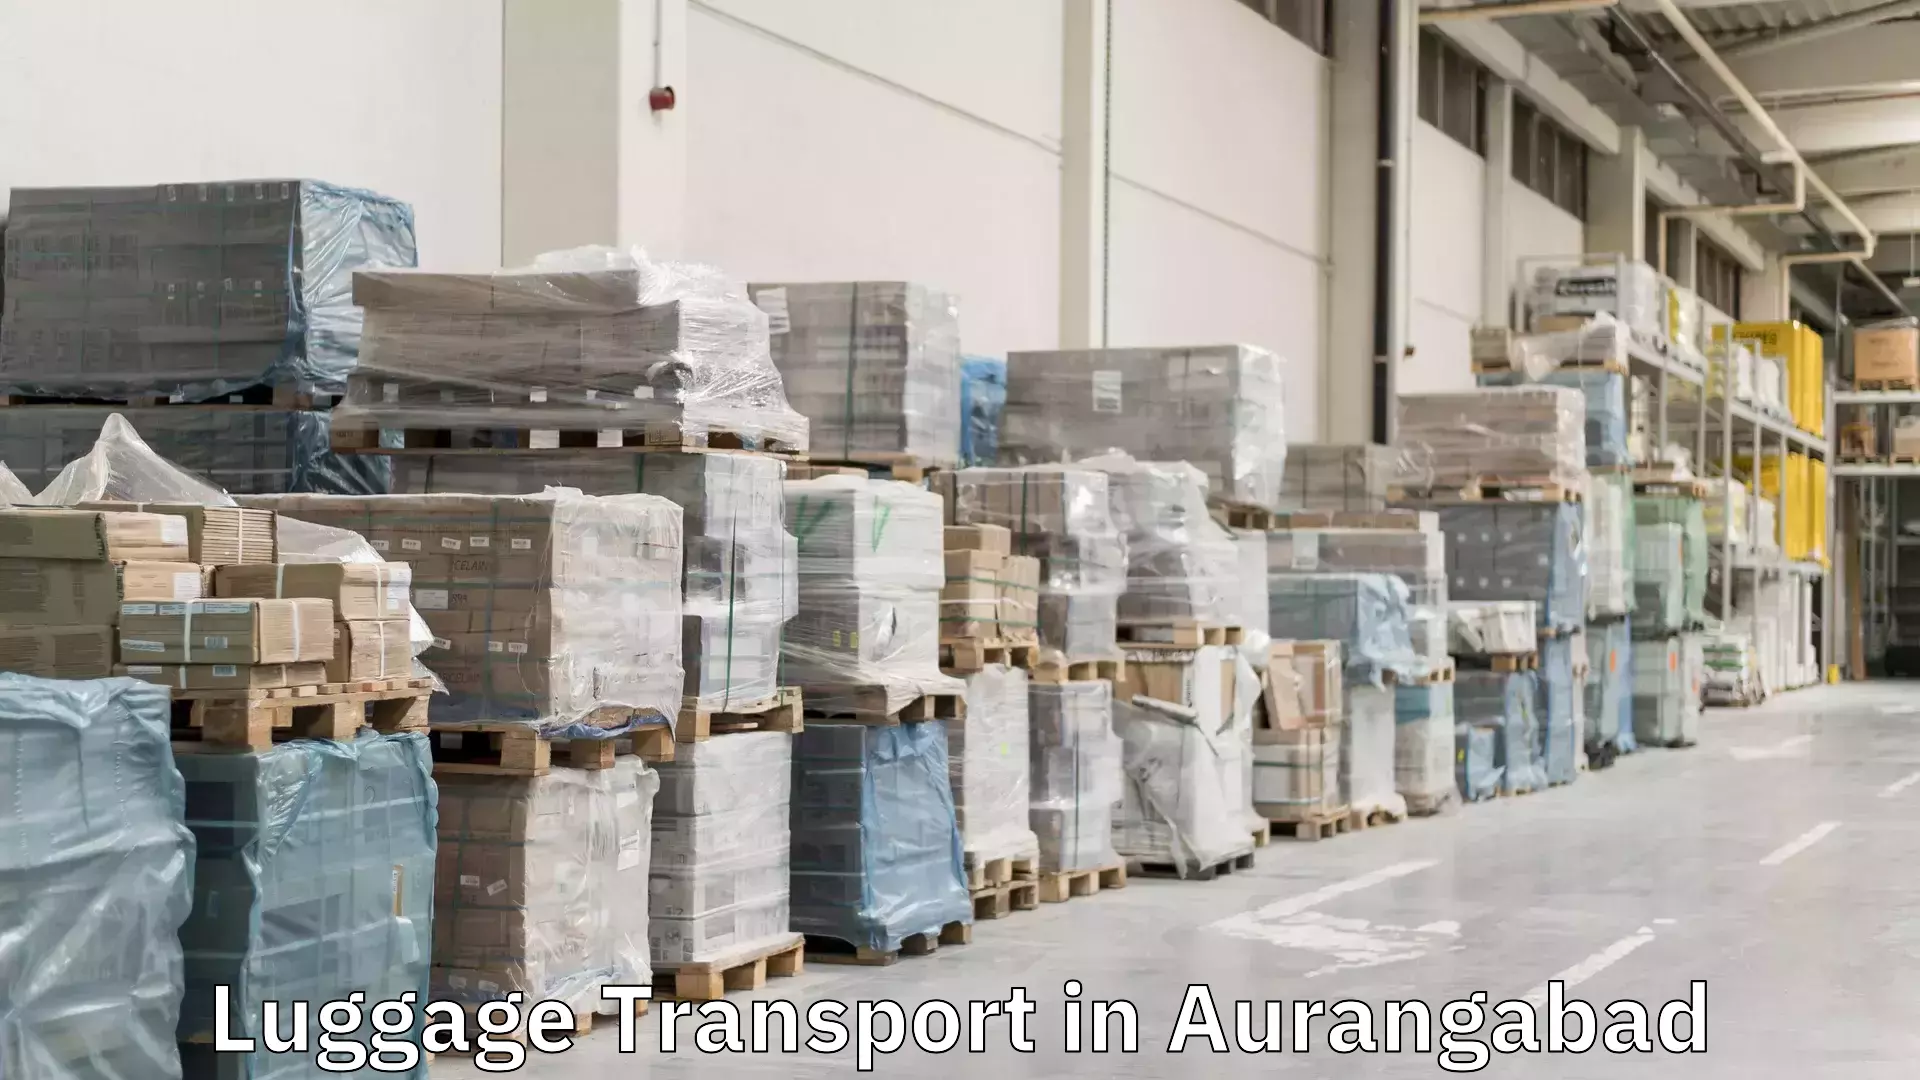 Luggage storage and delivery in Aurangabad